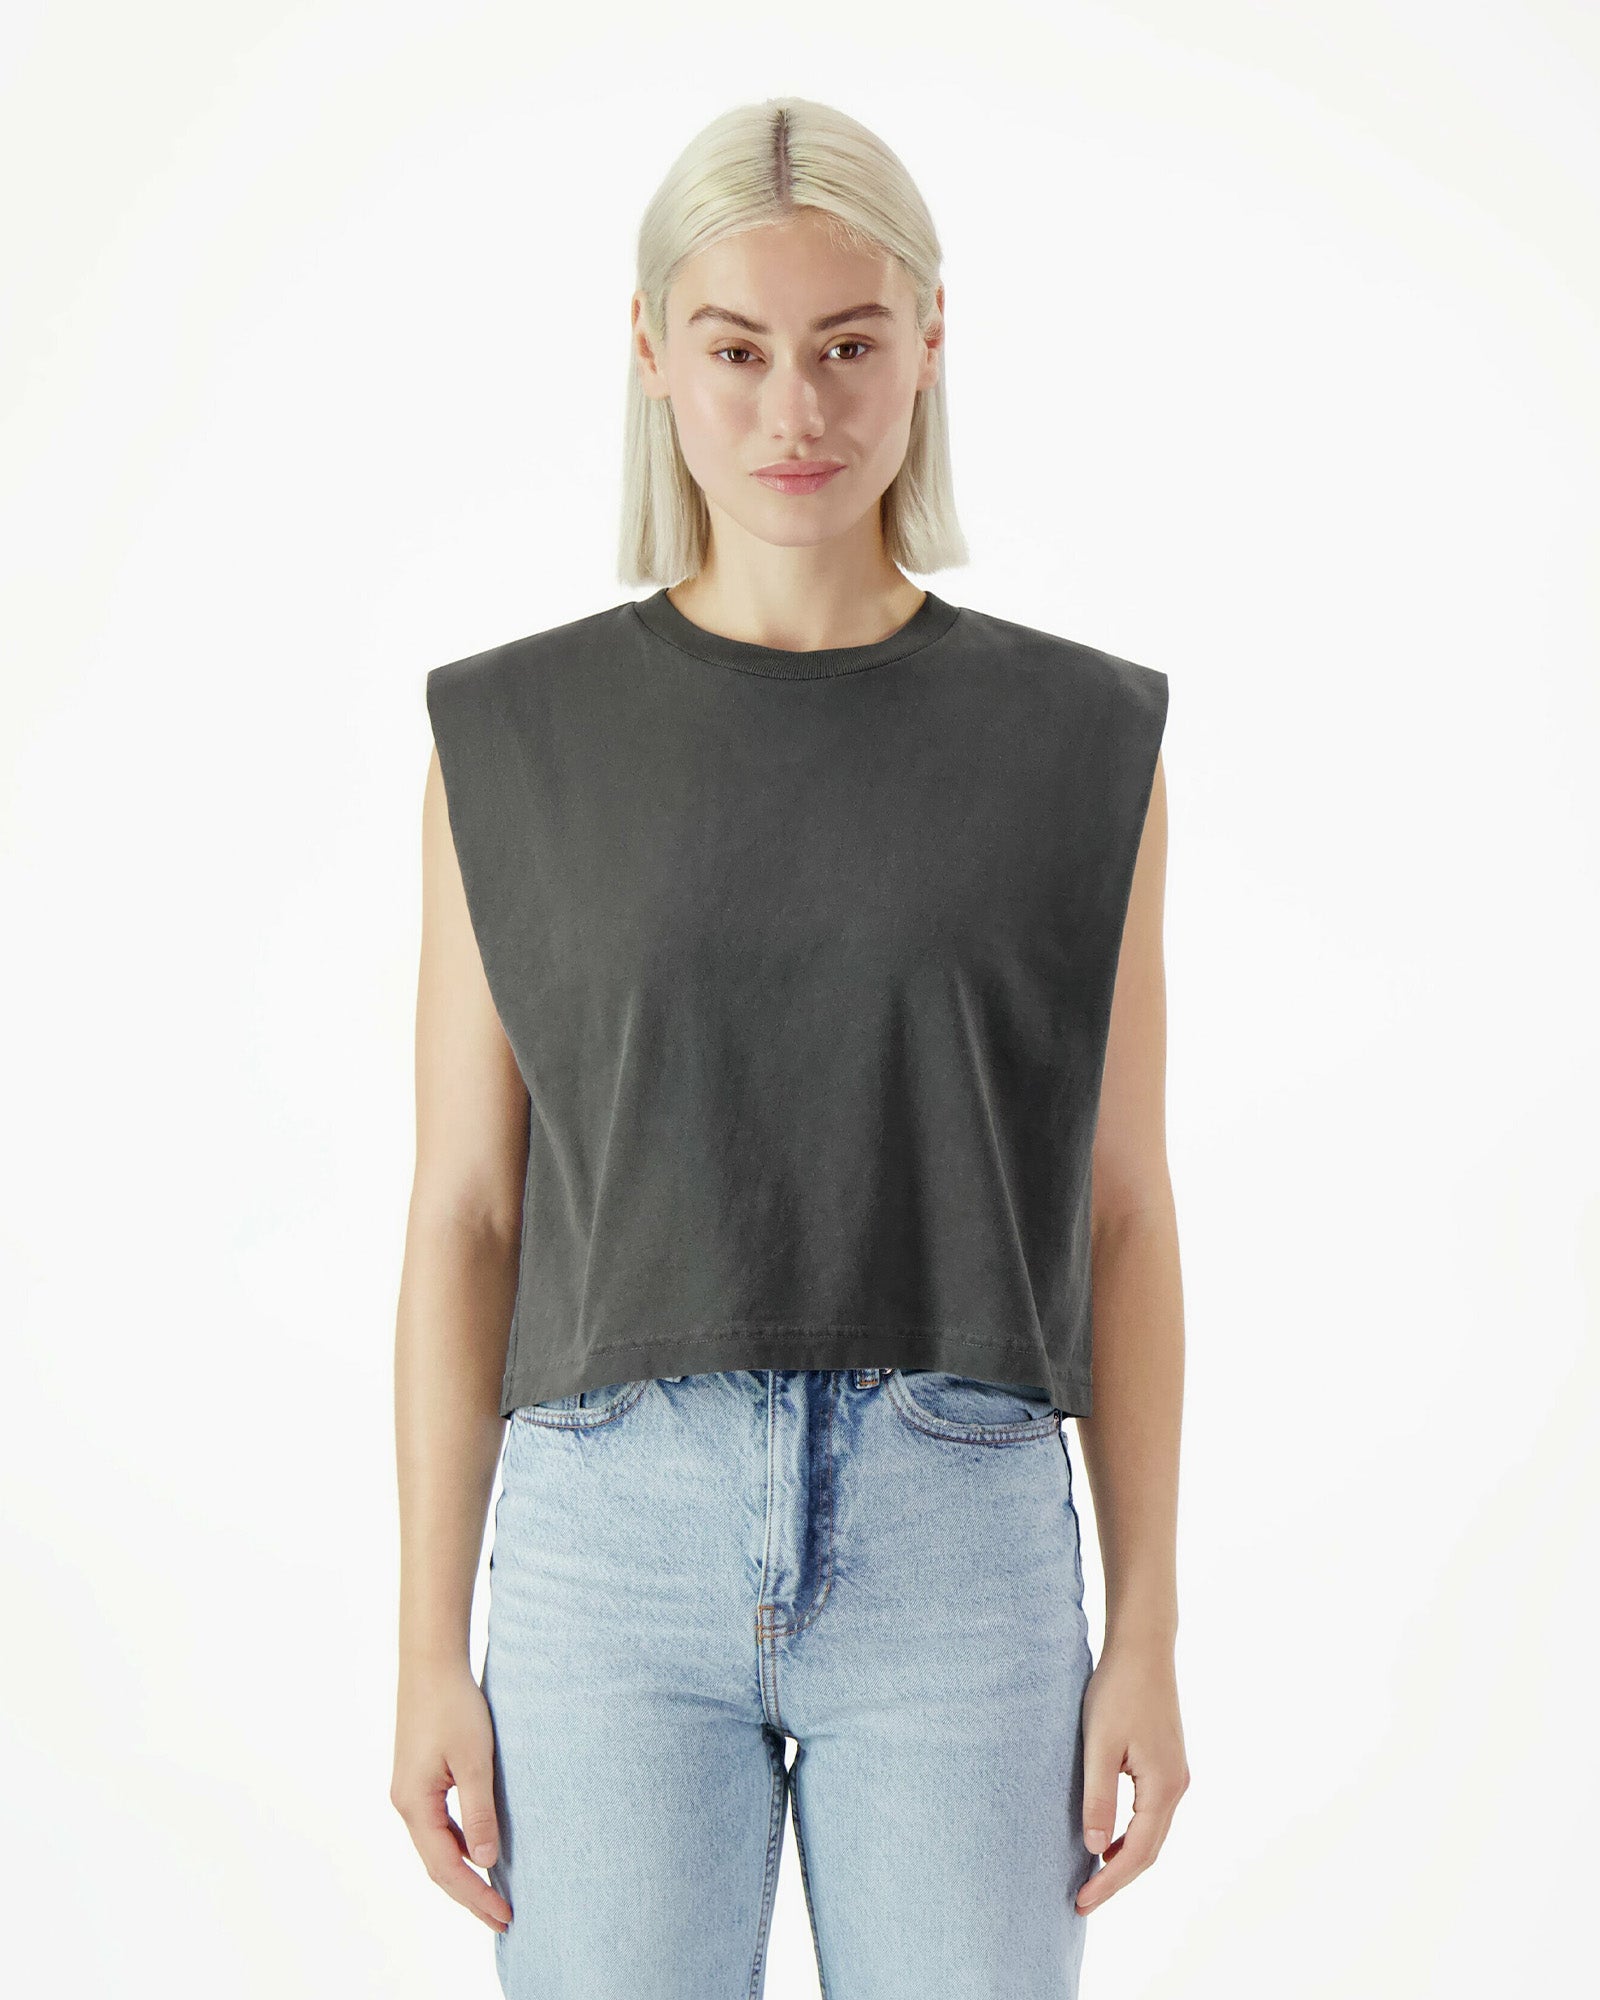 Garment Dyed Women's Muscle T-shirt - Faded Black